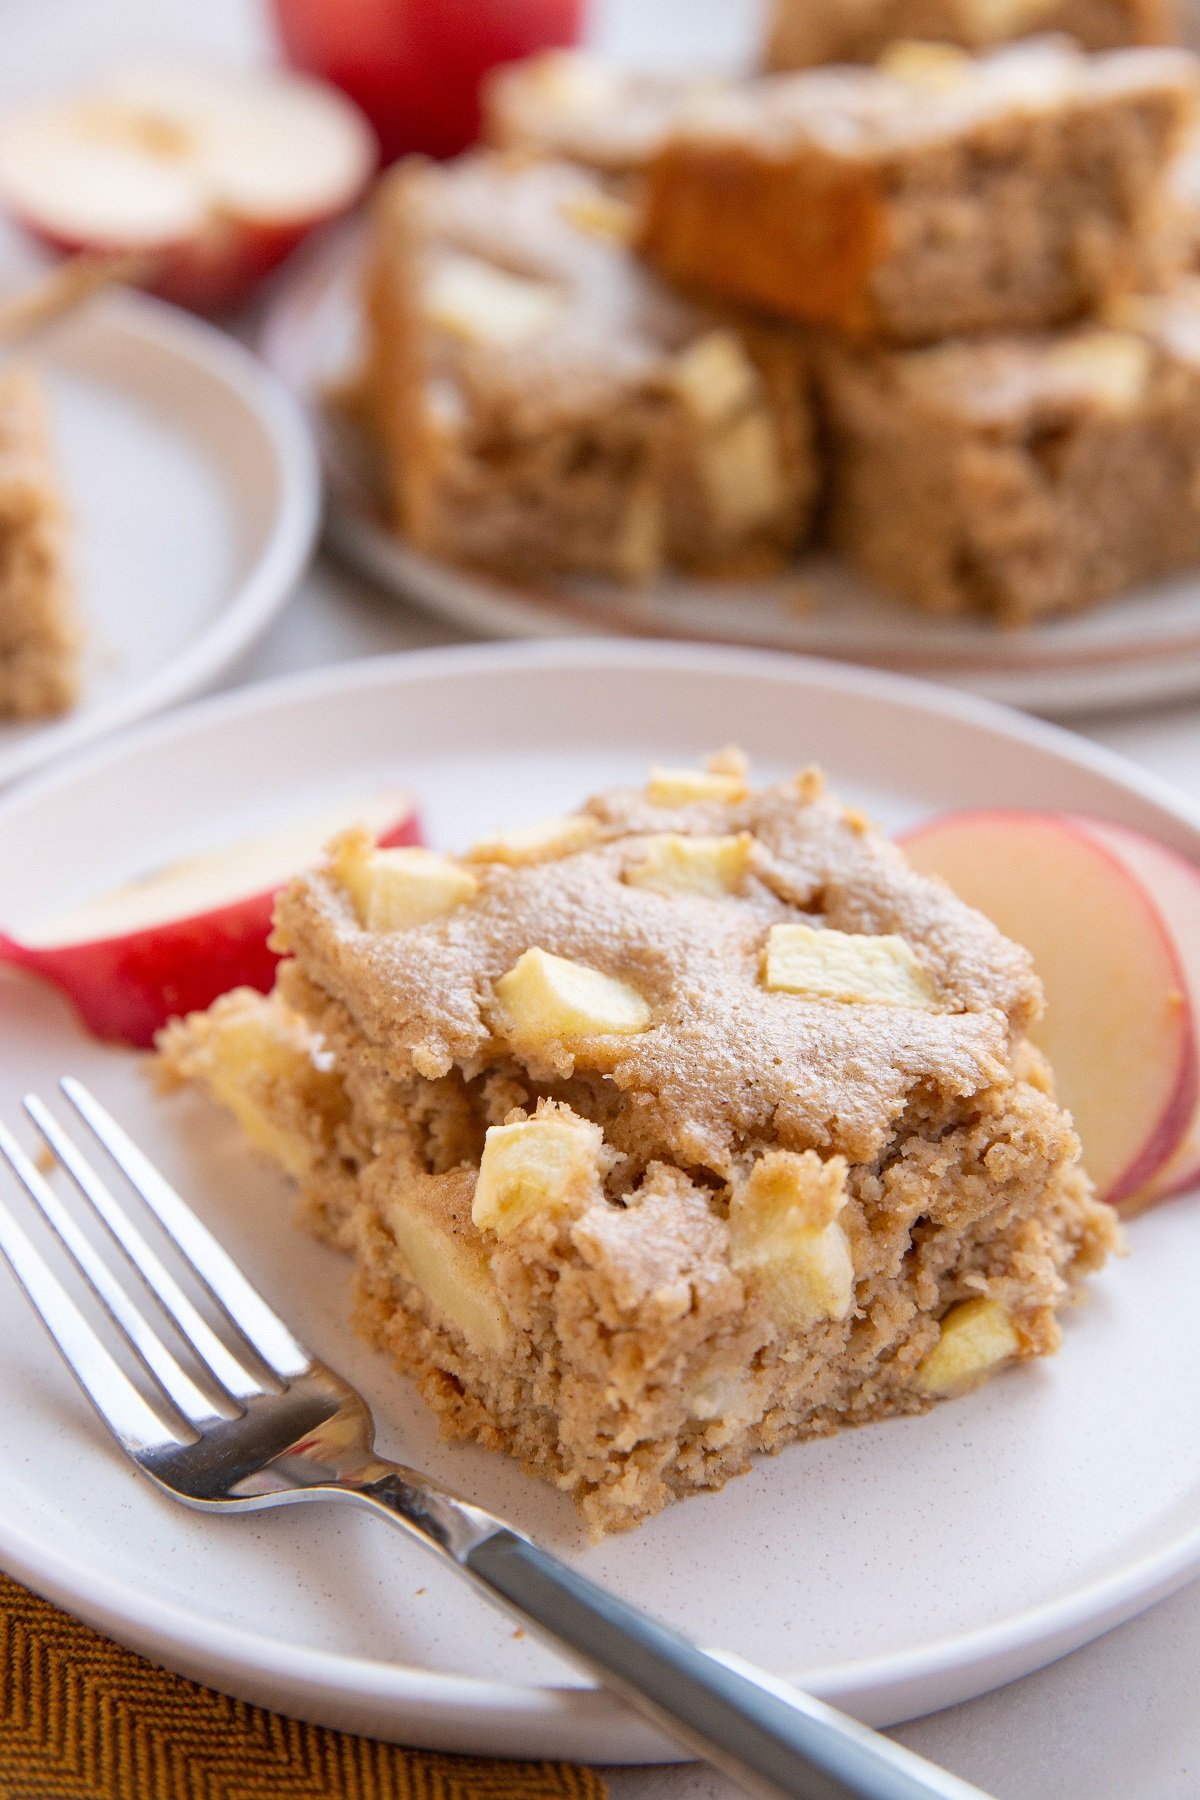 Thick slice of apple breakfast cake on a place with a plate of cake slices in the background.